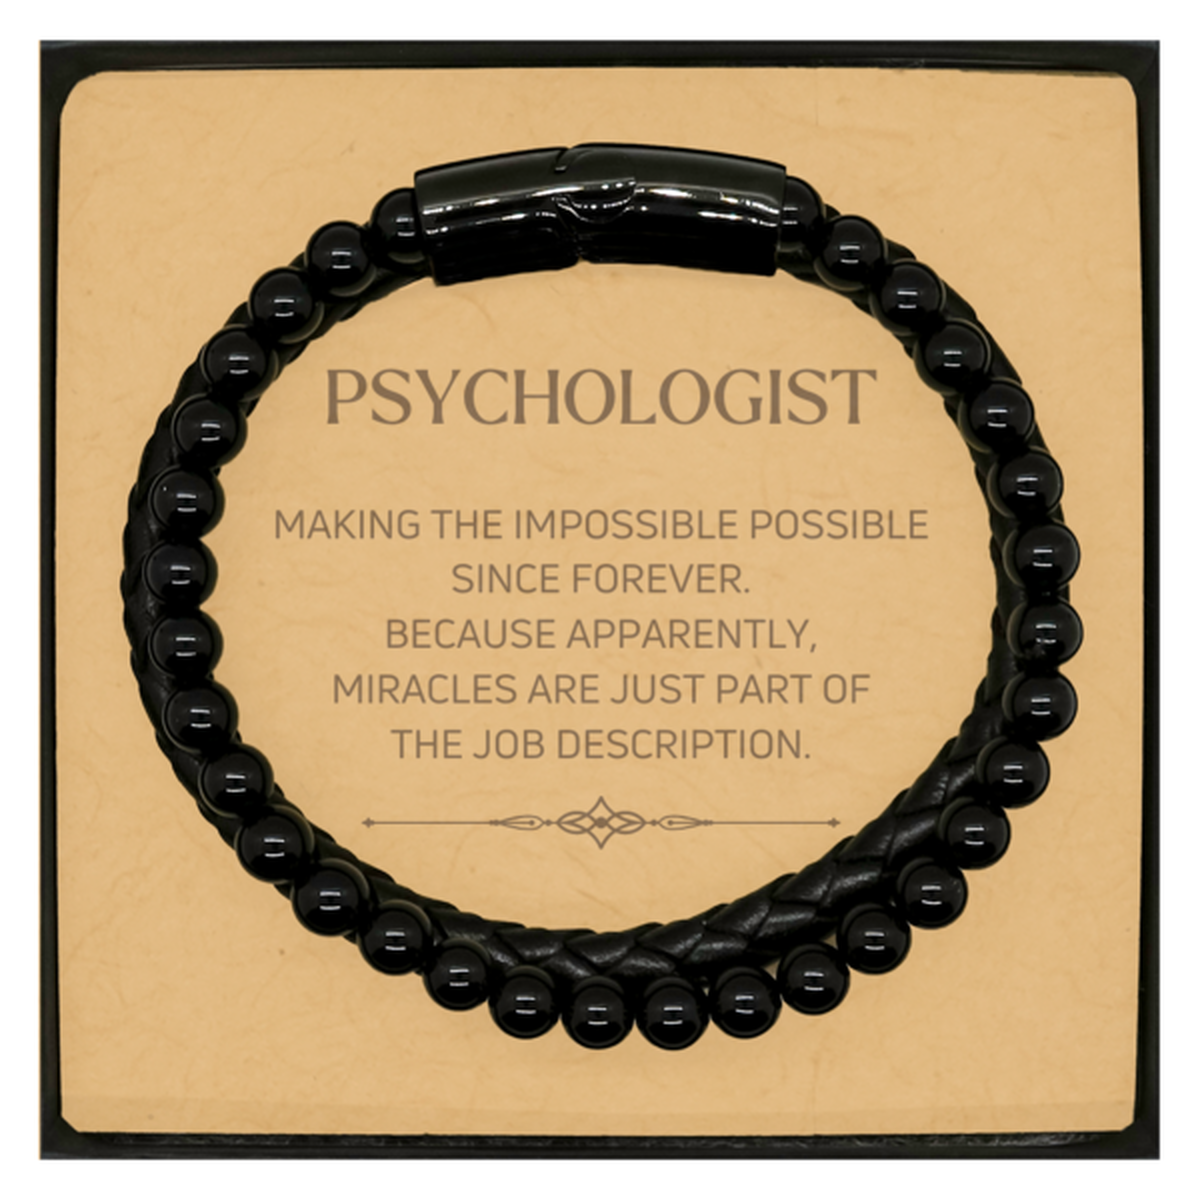 Funny Psychologist Gifts, Miracles are just part of the job description, Inspirational Birthday Christmas Stone Leather Bracelets For Psychologist, Men, Women, Coworkers, Friends, Boss